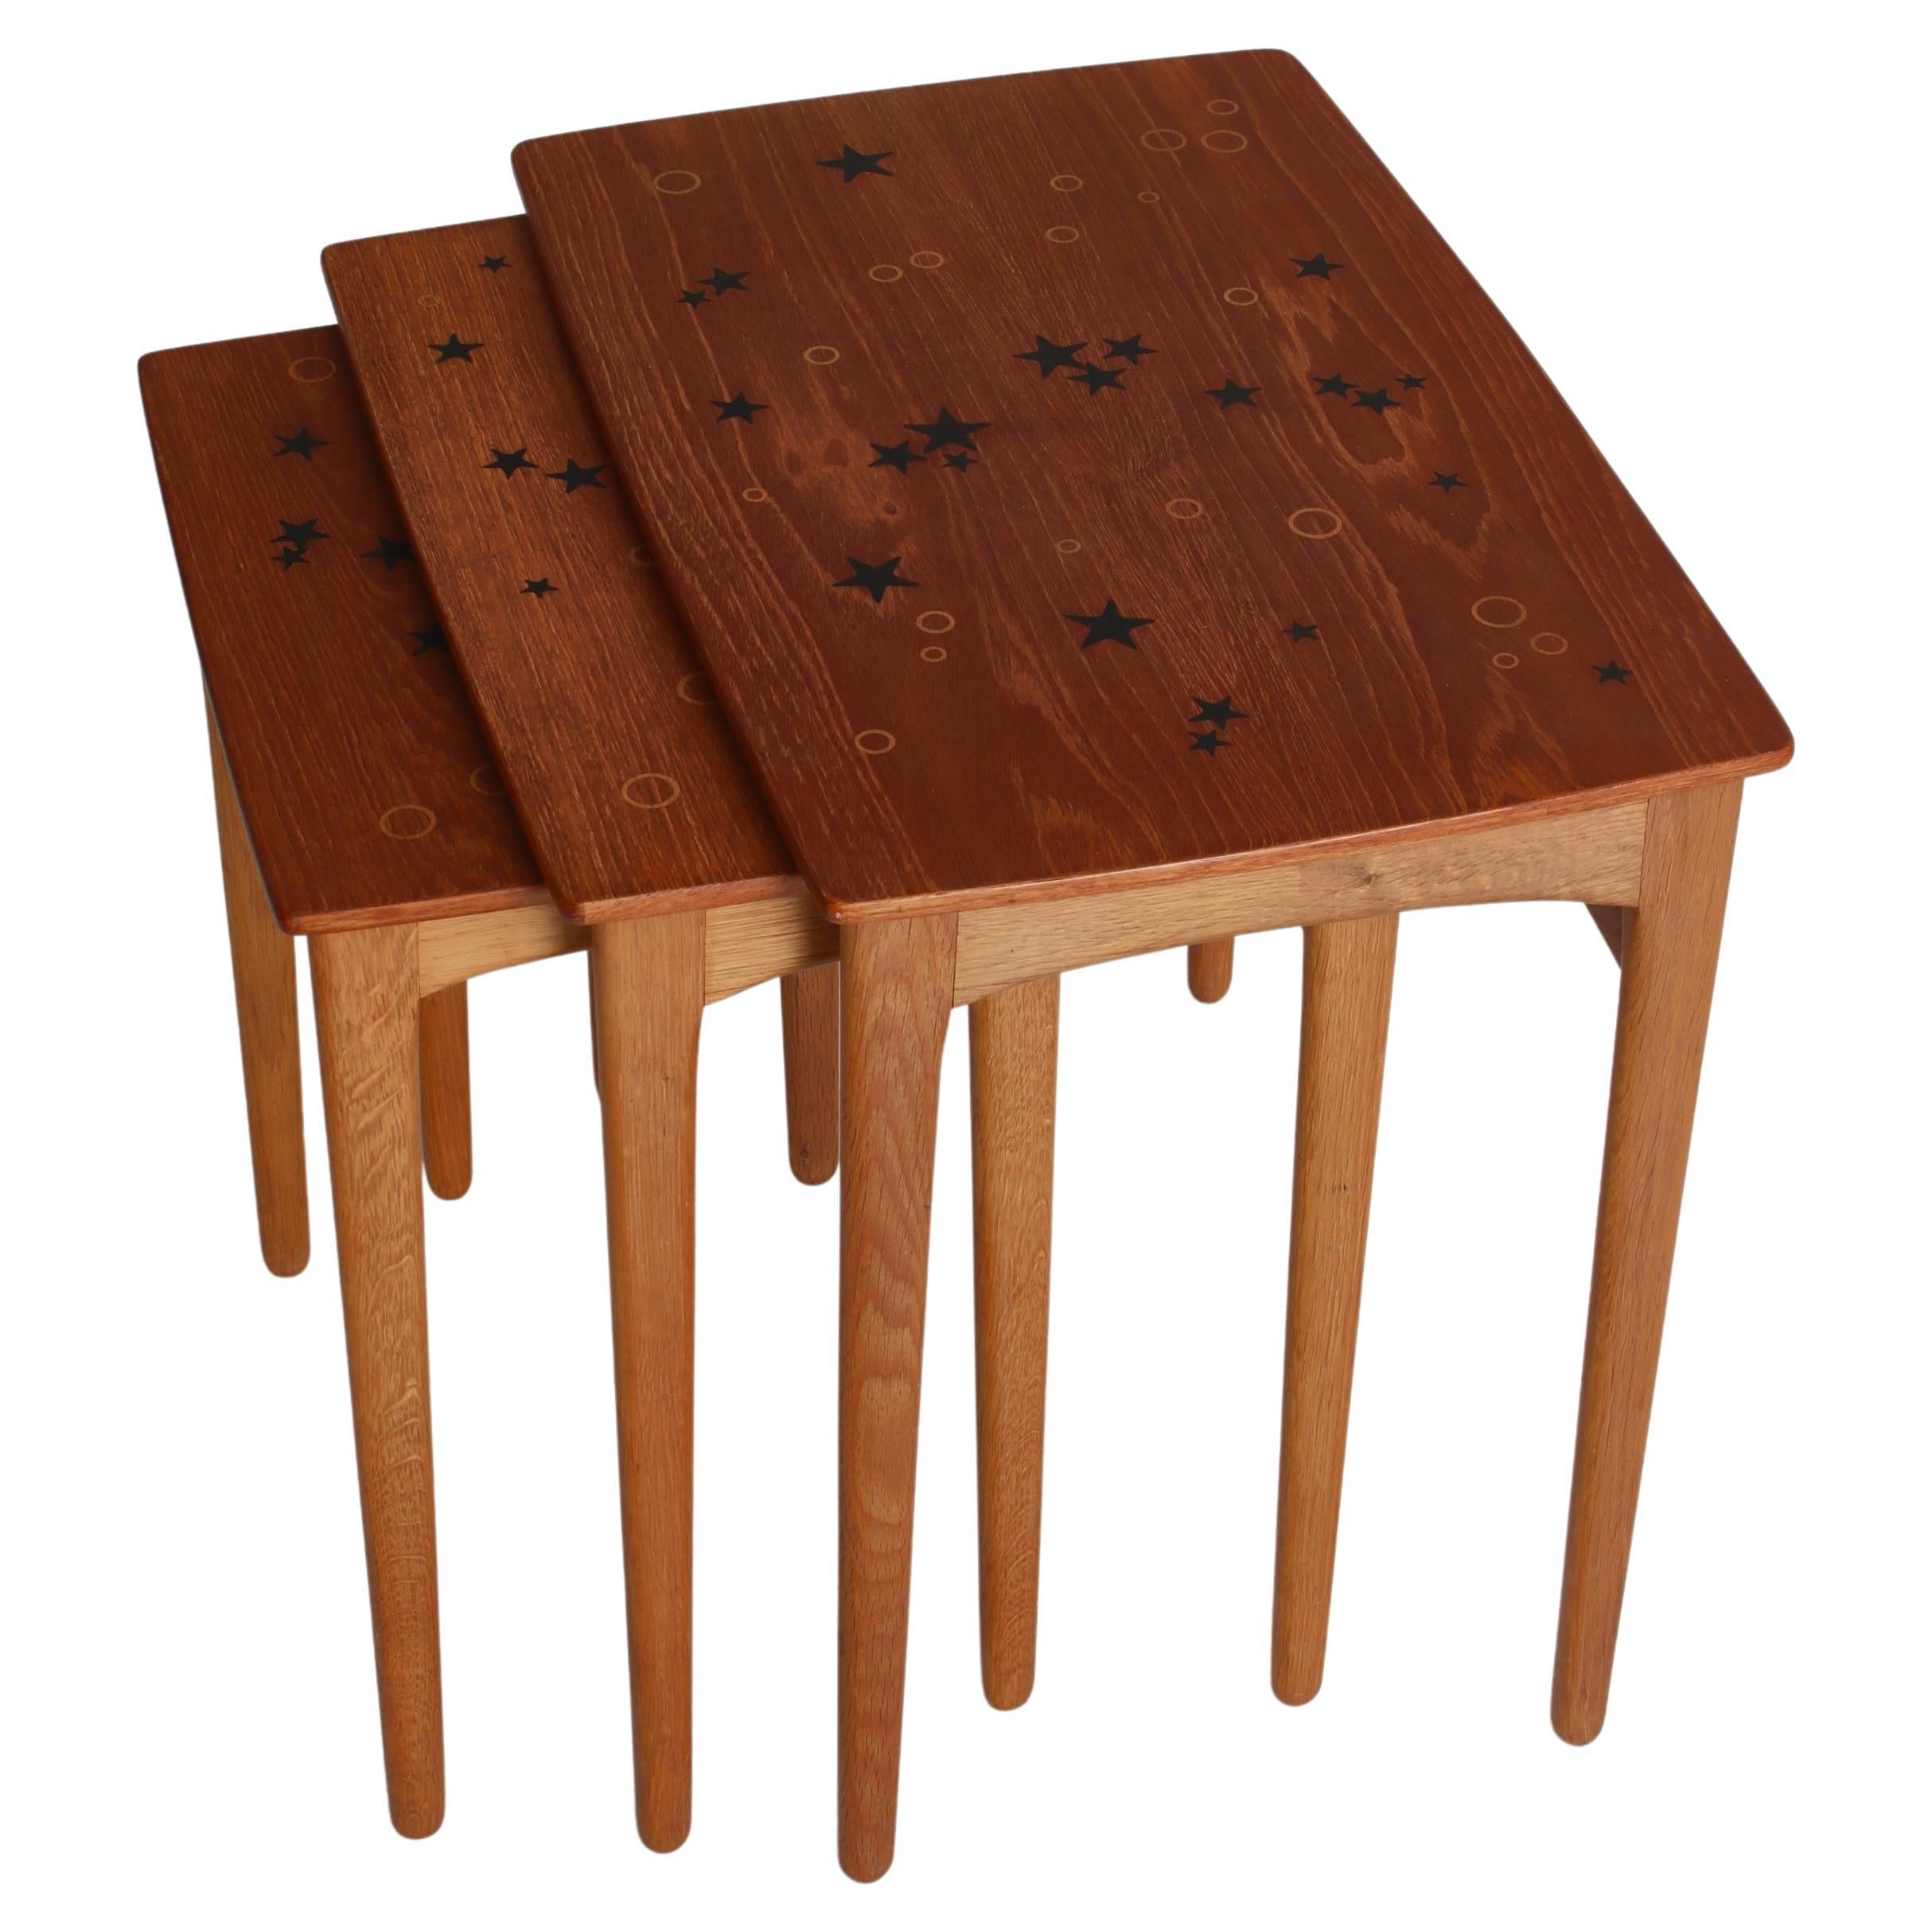 Nesting Tables in Teak and oak by Svend Aage Madsen, Denmark, 1950s For Sale